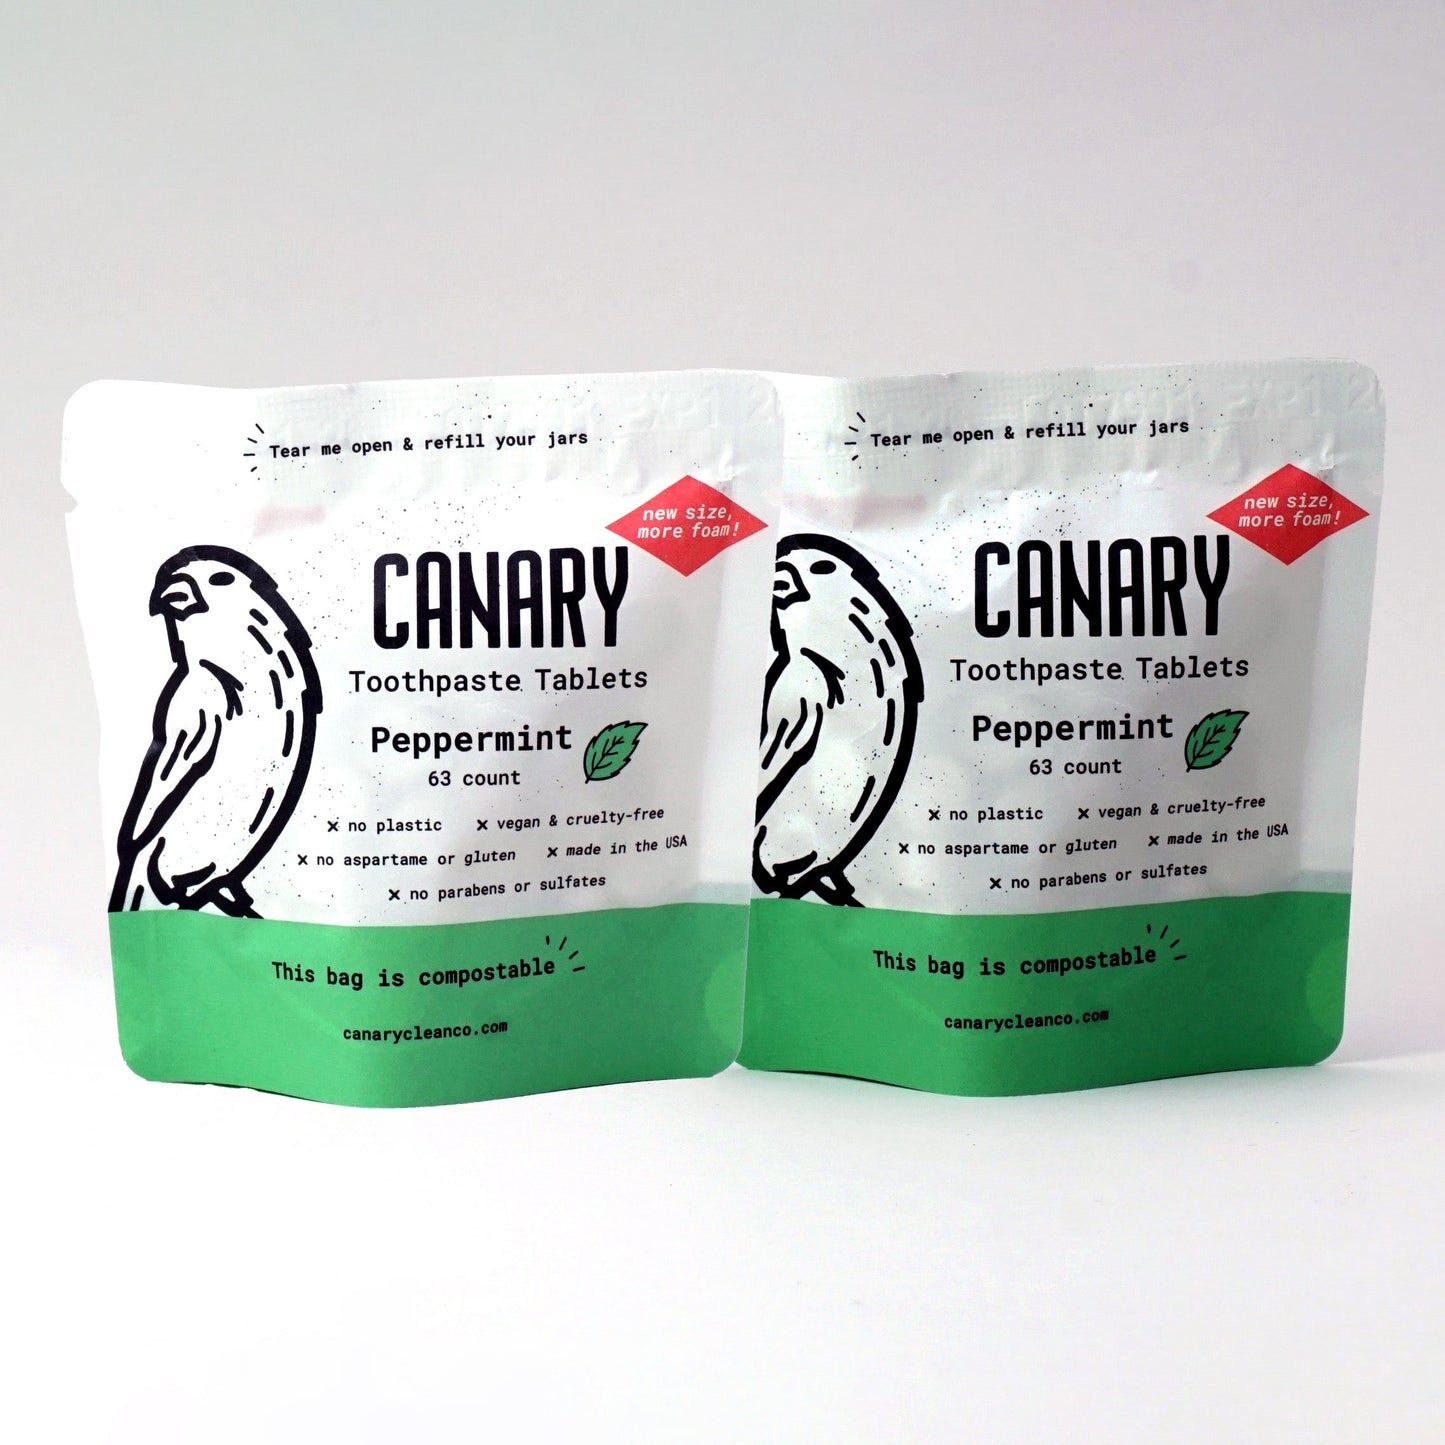 Peppermint Toothpaste Tablets - NEW & IMPROVED! by Canary